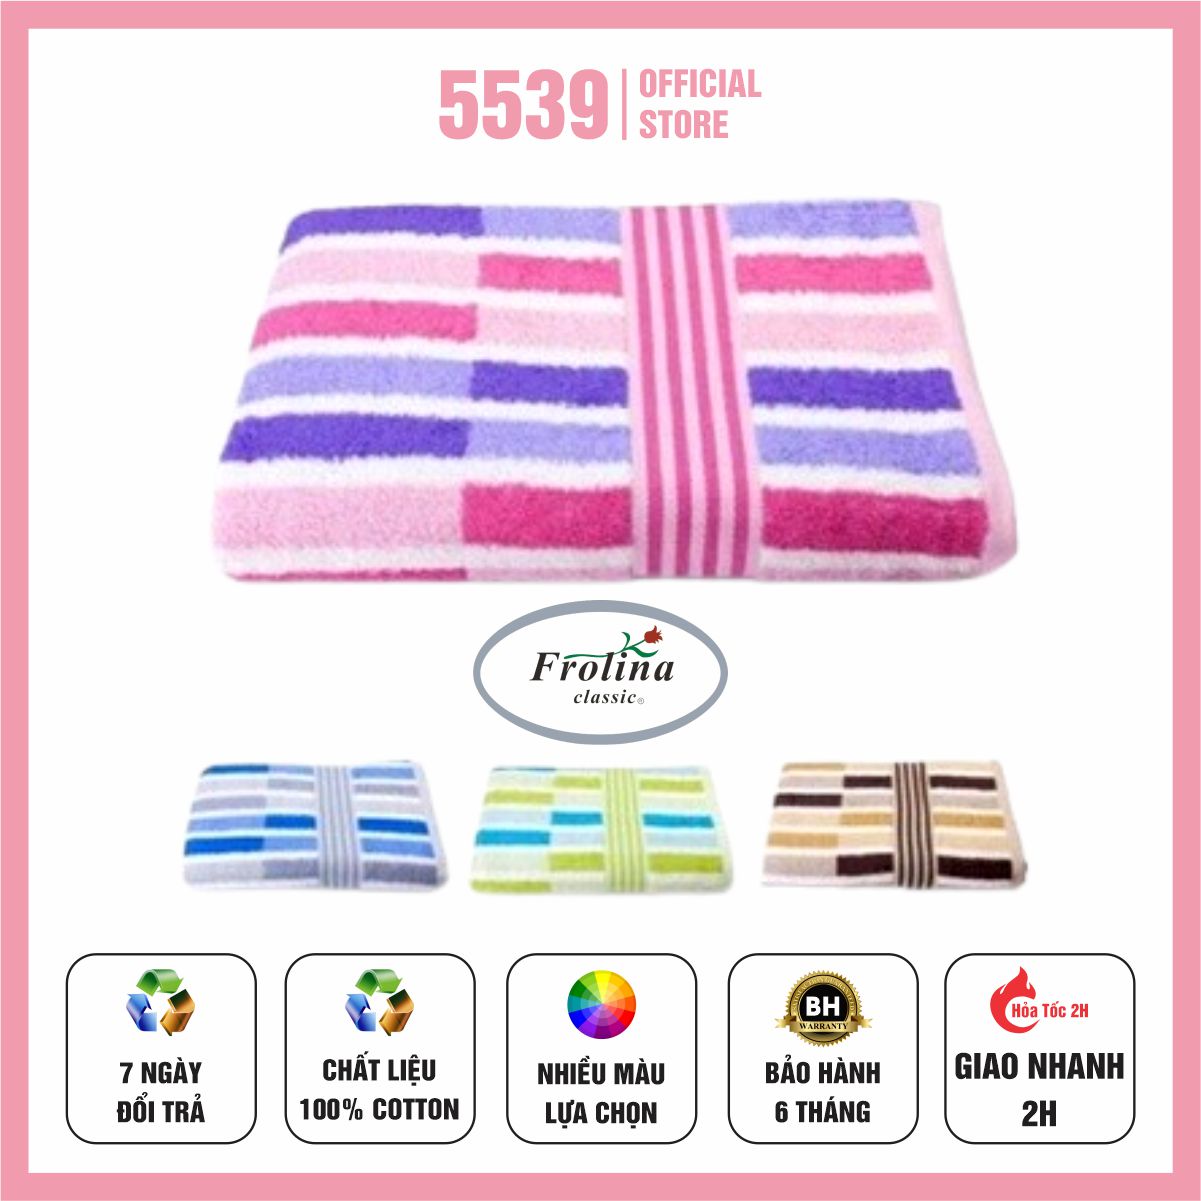 Thailand premium soft smooth fast drying towel frolina face towel suitable